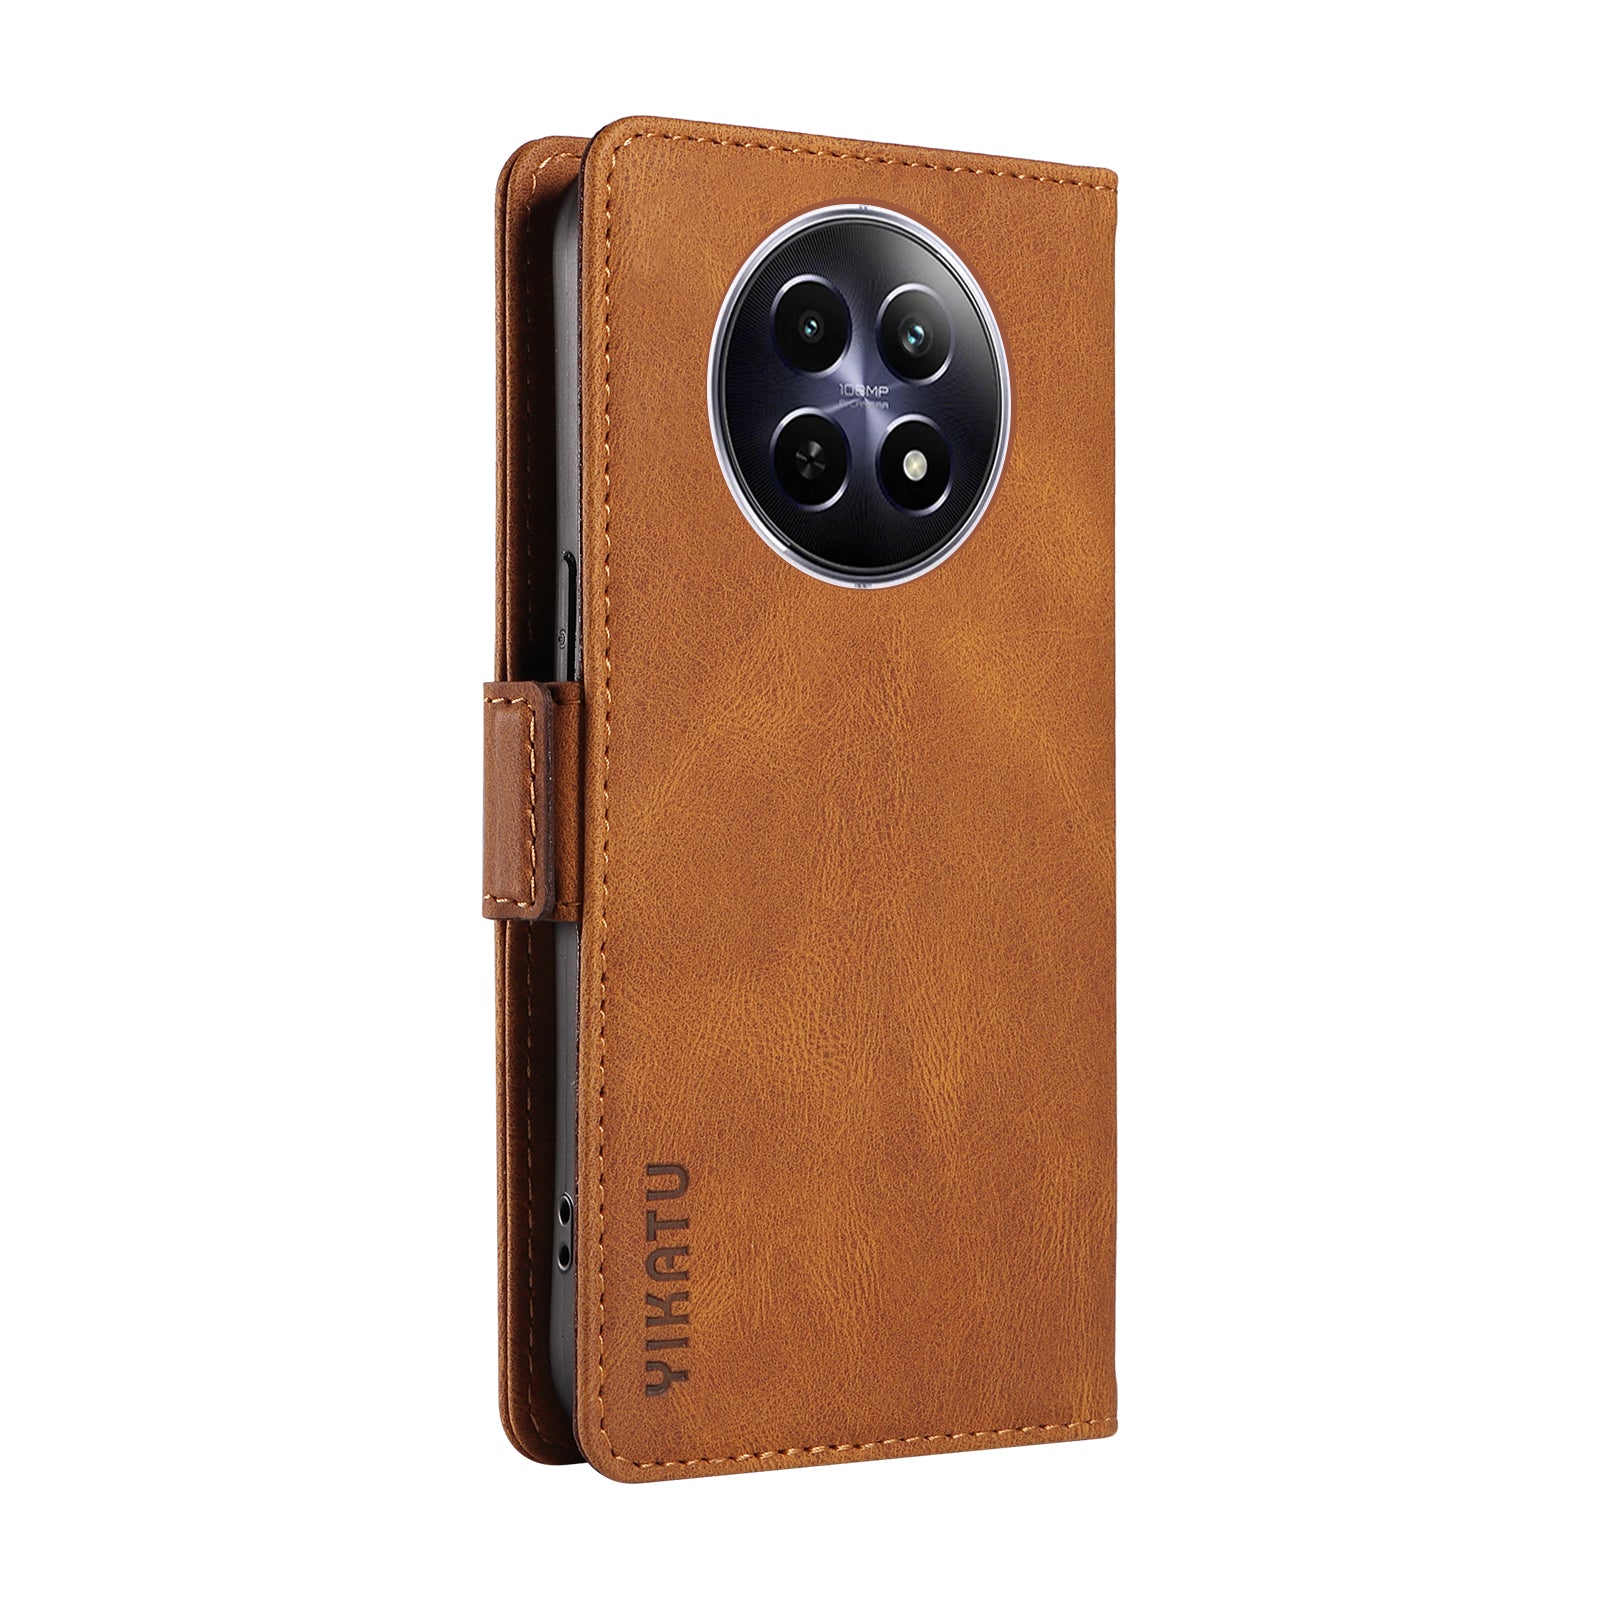 YIKATU YK-005 For Realme 12 Case PU Leather Skin-touch Wallet Flip Phone Cover - Brown